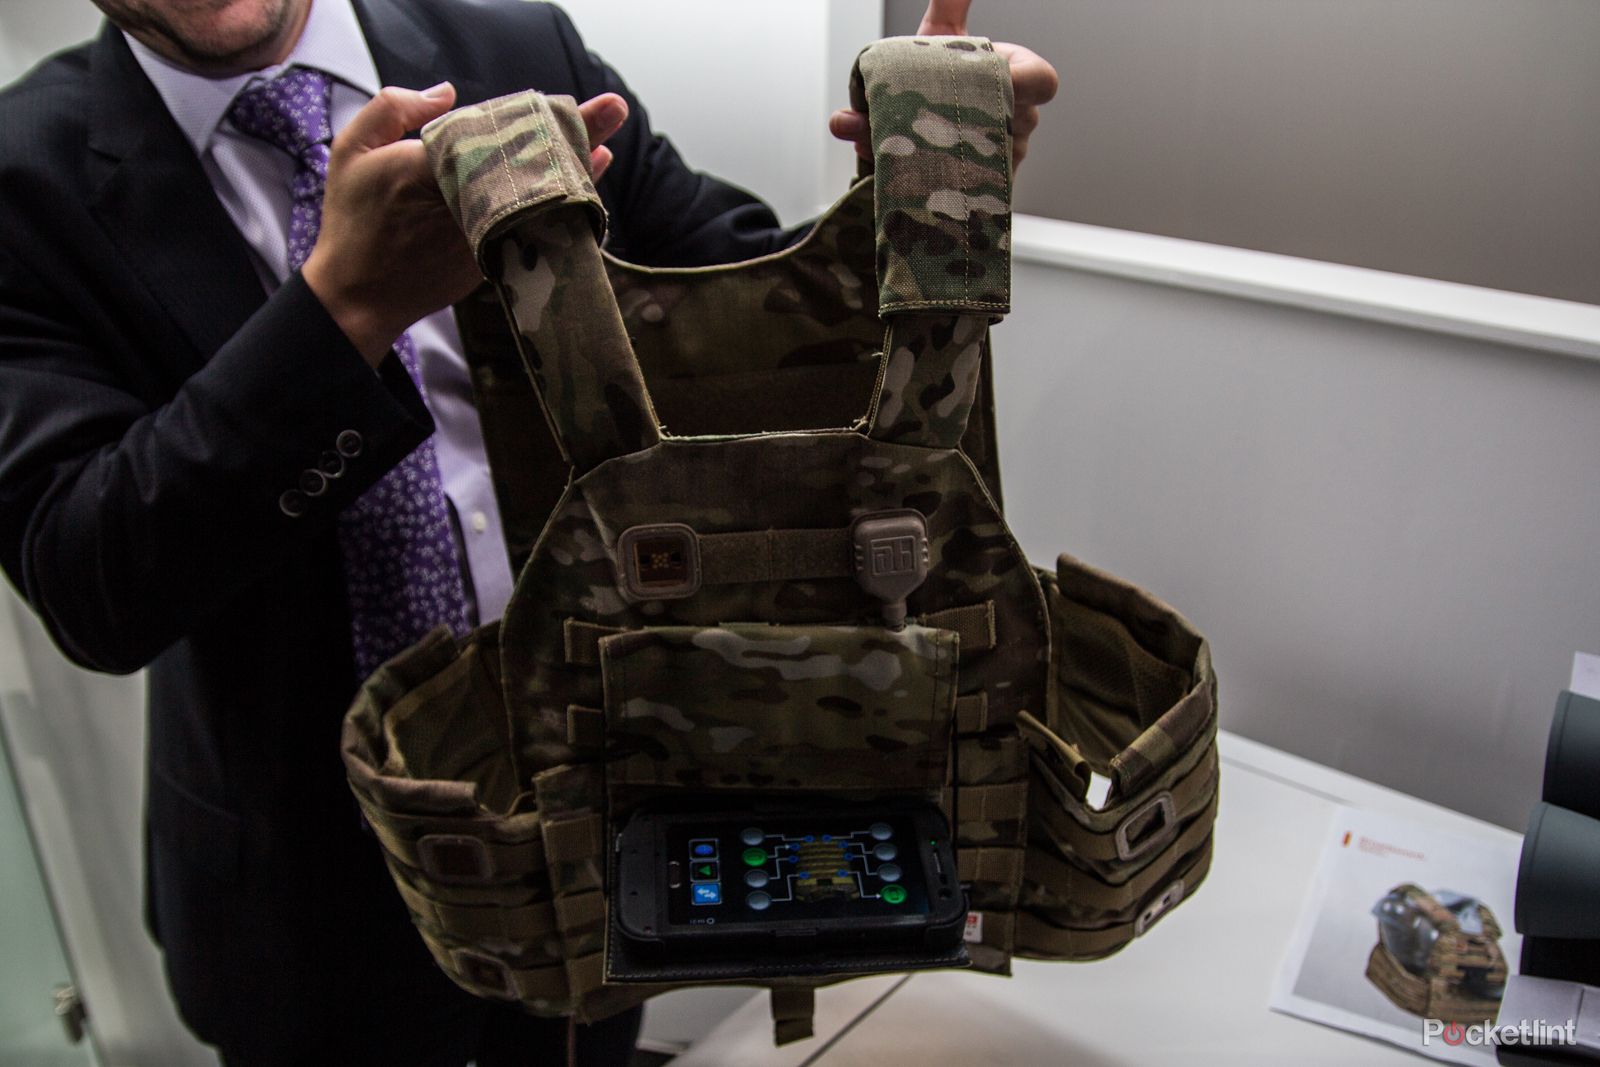 broadsword spine is the wearable tech to power future warfighters image 1